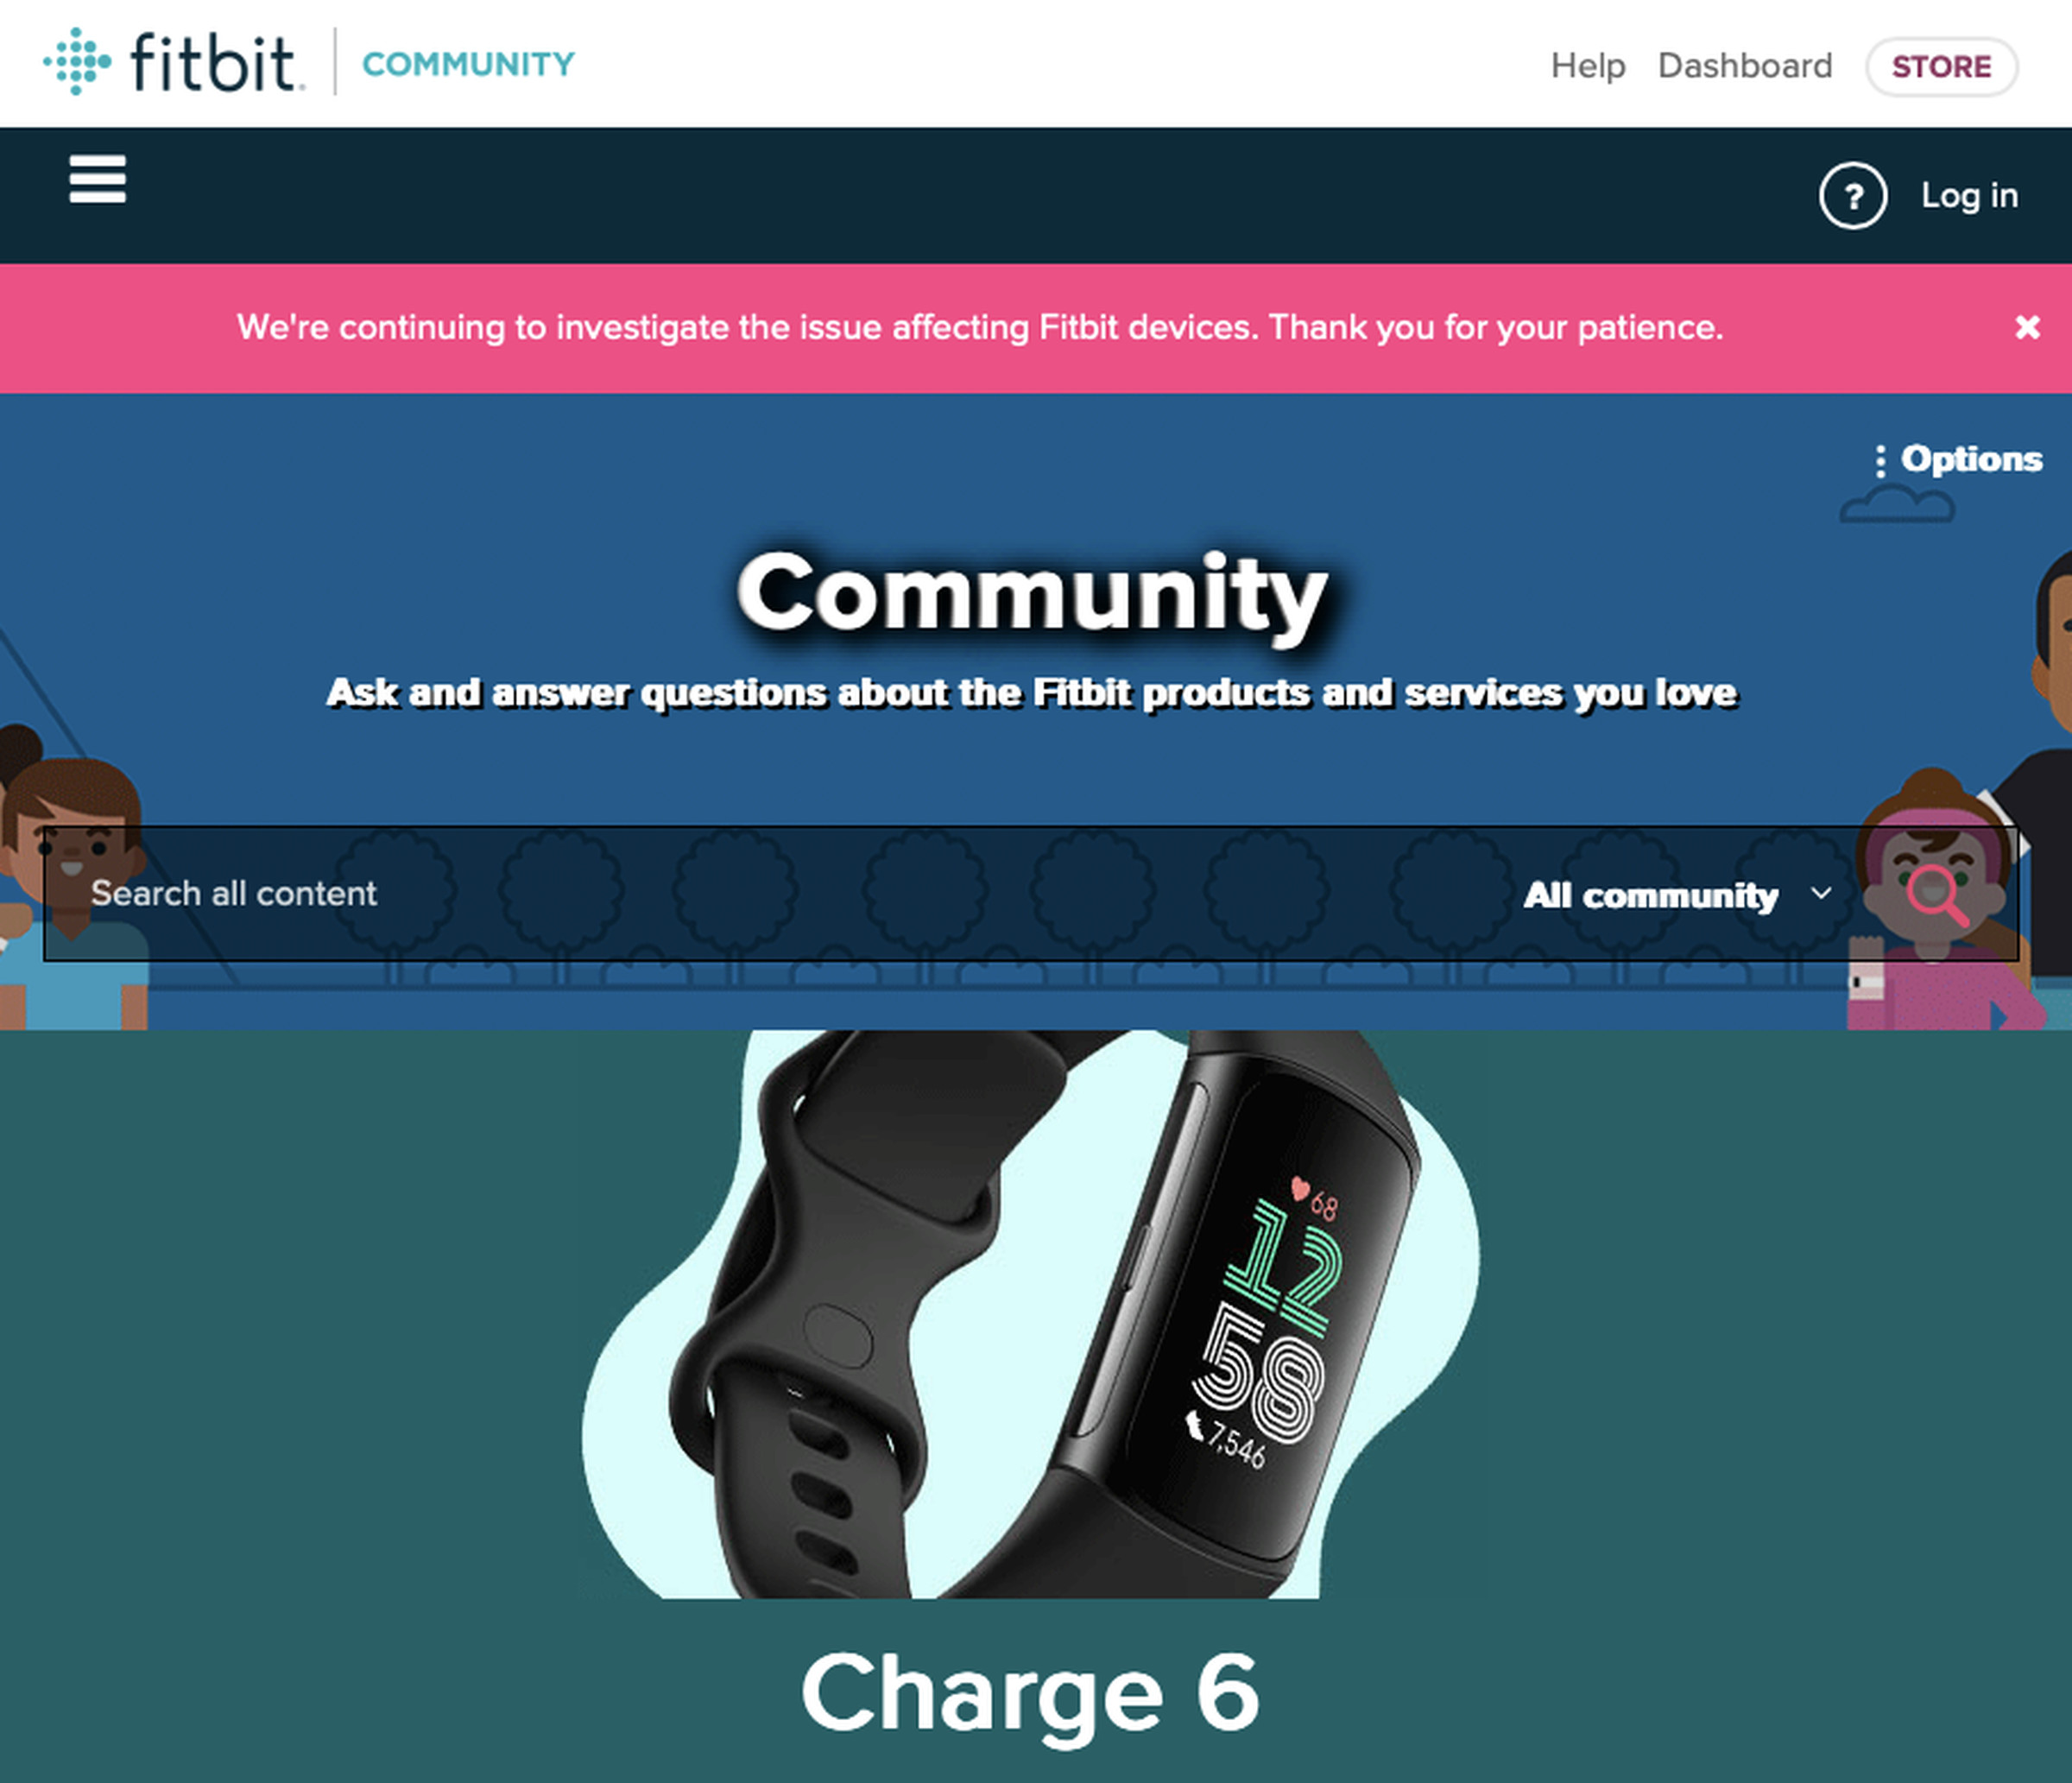 A screenshot of a Fitbit community page.